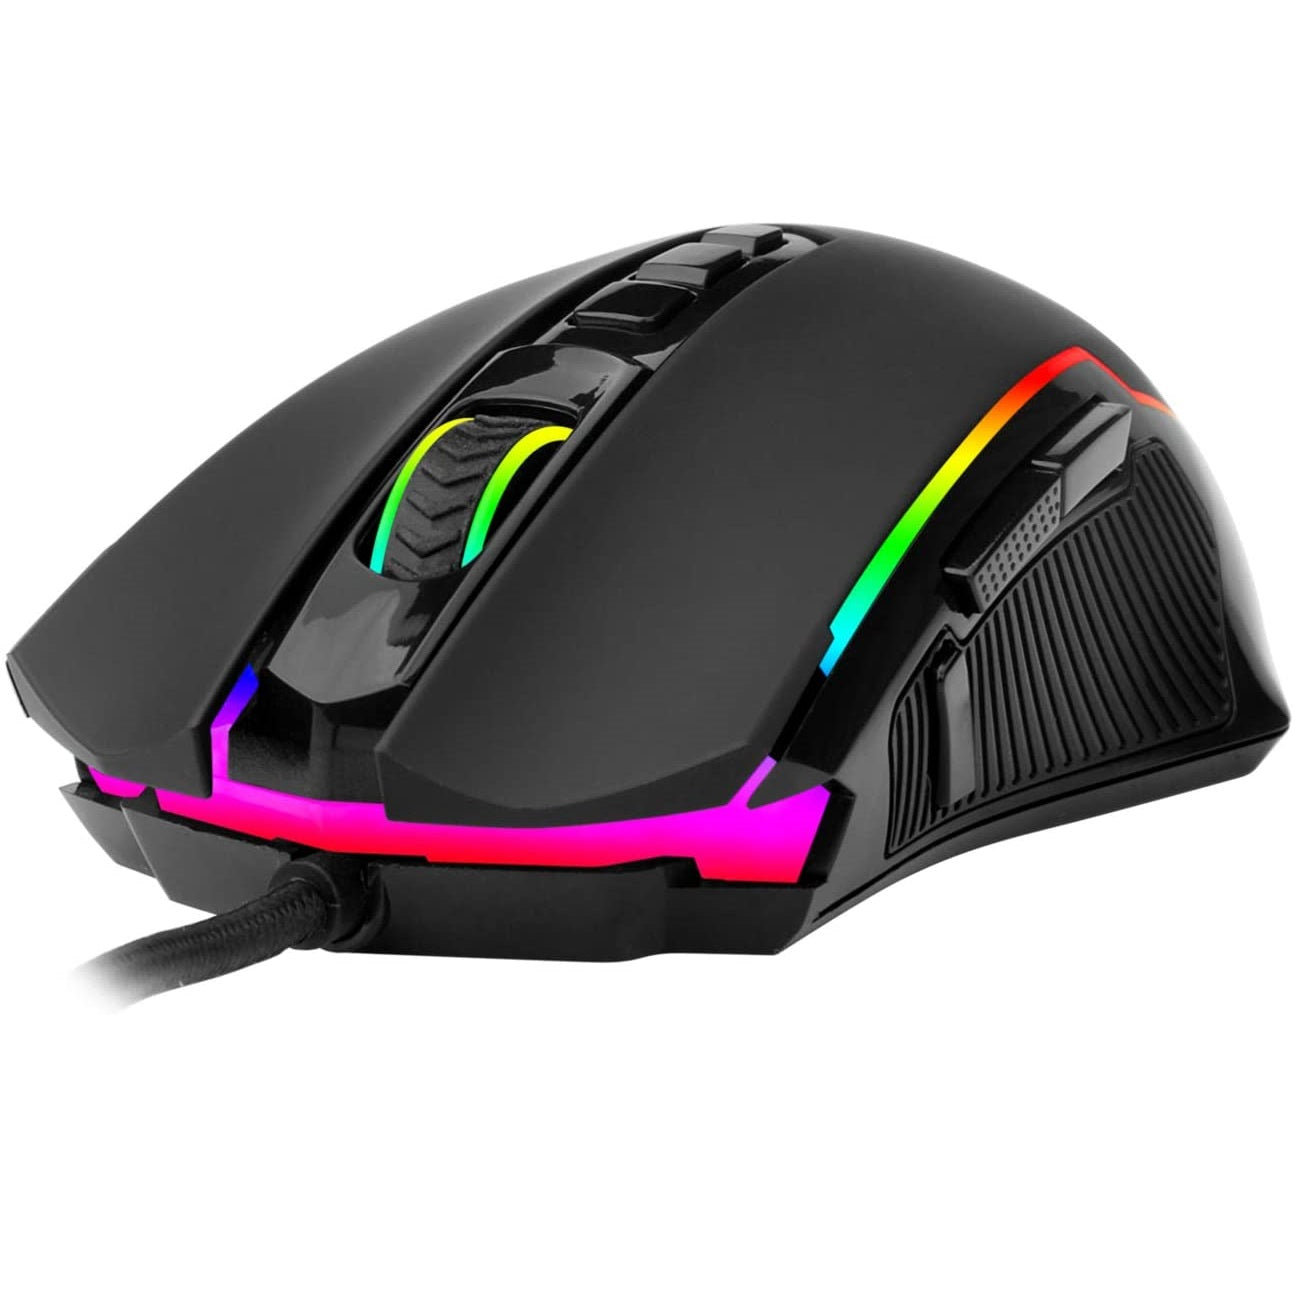 Redragon M910 RANGER CHROMA Gaming Mouse with 16.8 Million RGB Backlit, 9 Programmable Buttons, Up to 12400 DPI User Adjustable